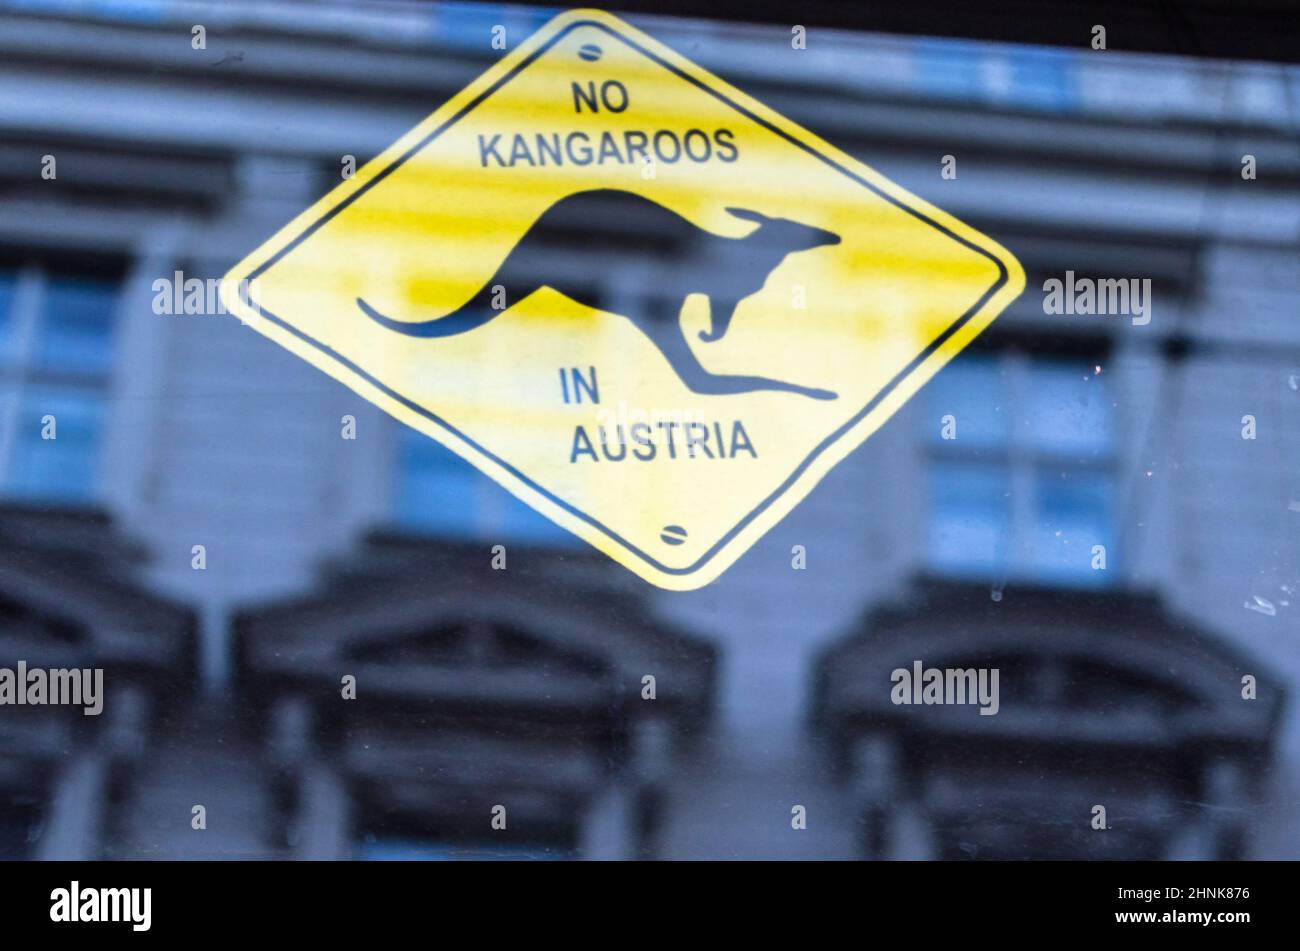 VIENNA, AUSTRIA - SEPTEMBER 1, 2013: Funny sign at a souvenir shop in Vienna, Austria, a saying because Austria is frequently confused with Australia Stock Photo